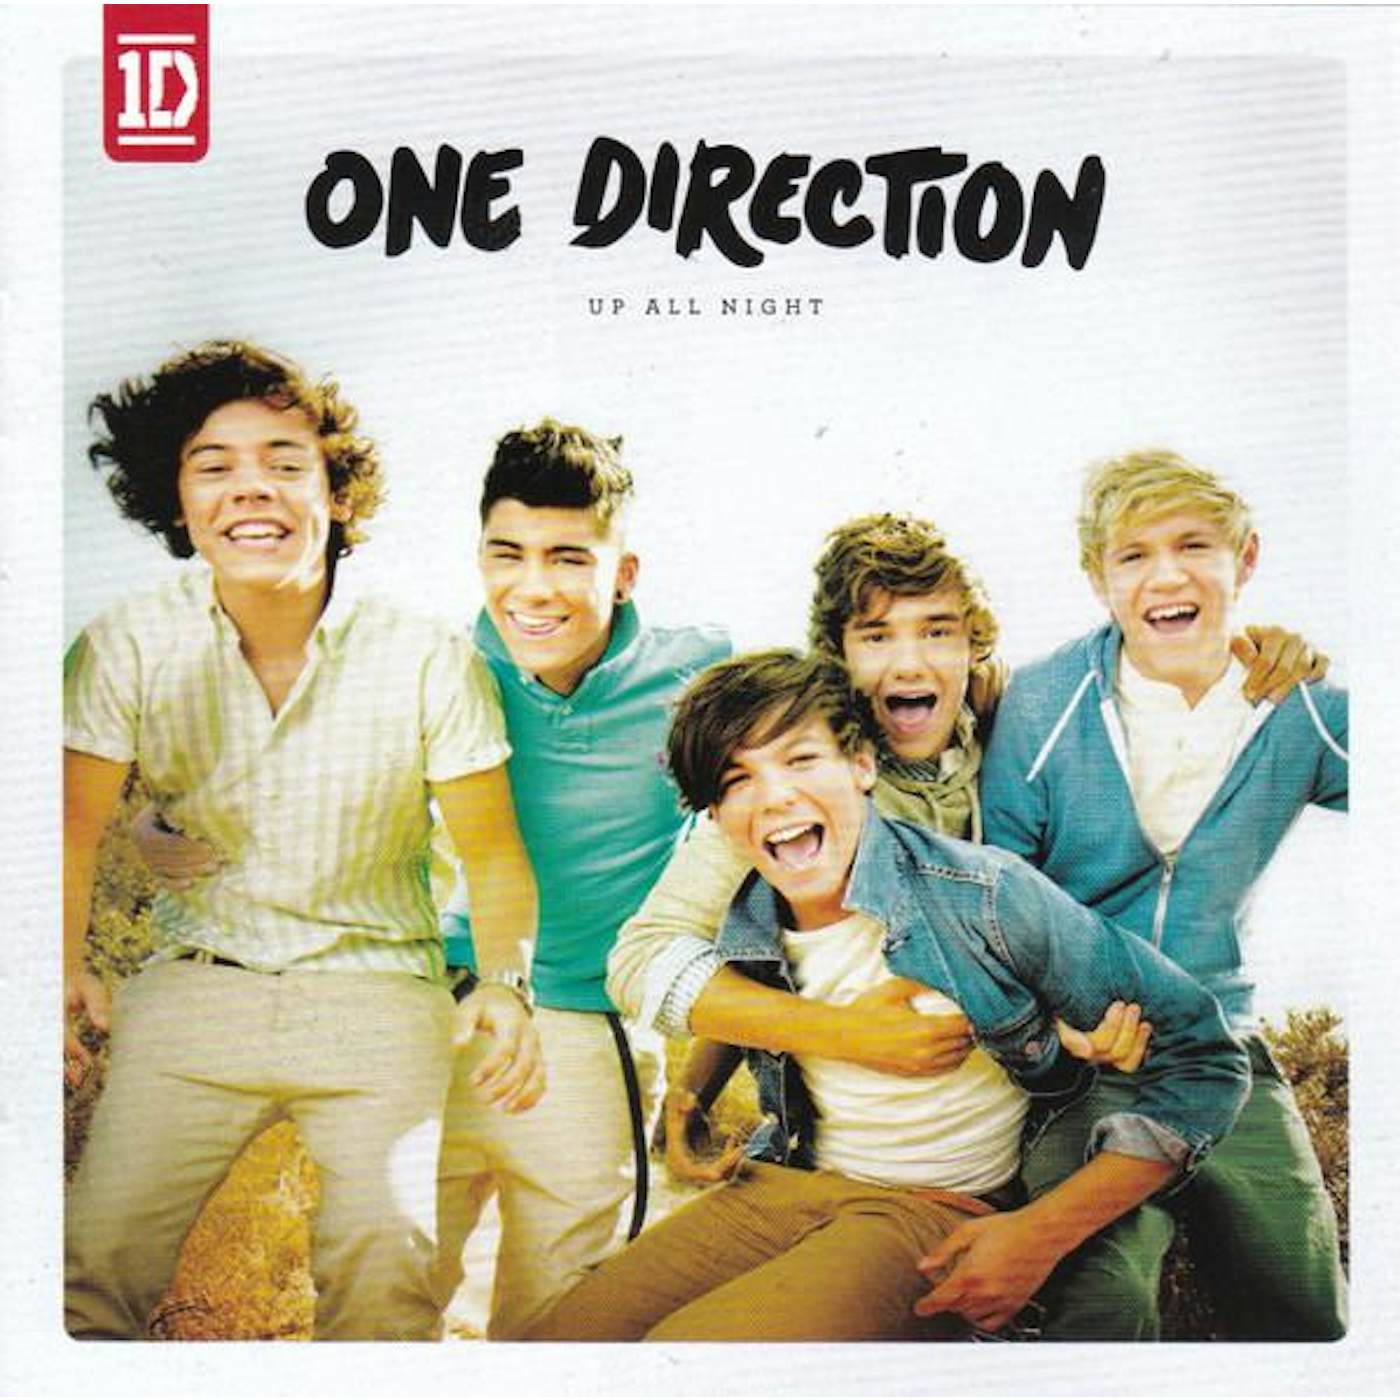 One Direction UP ALL NIGHT CD